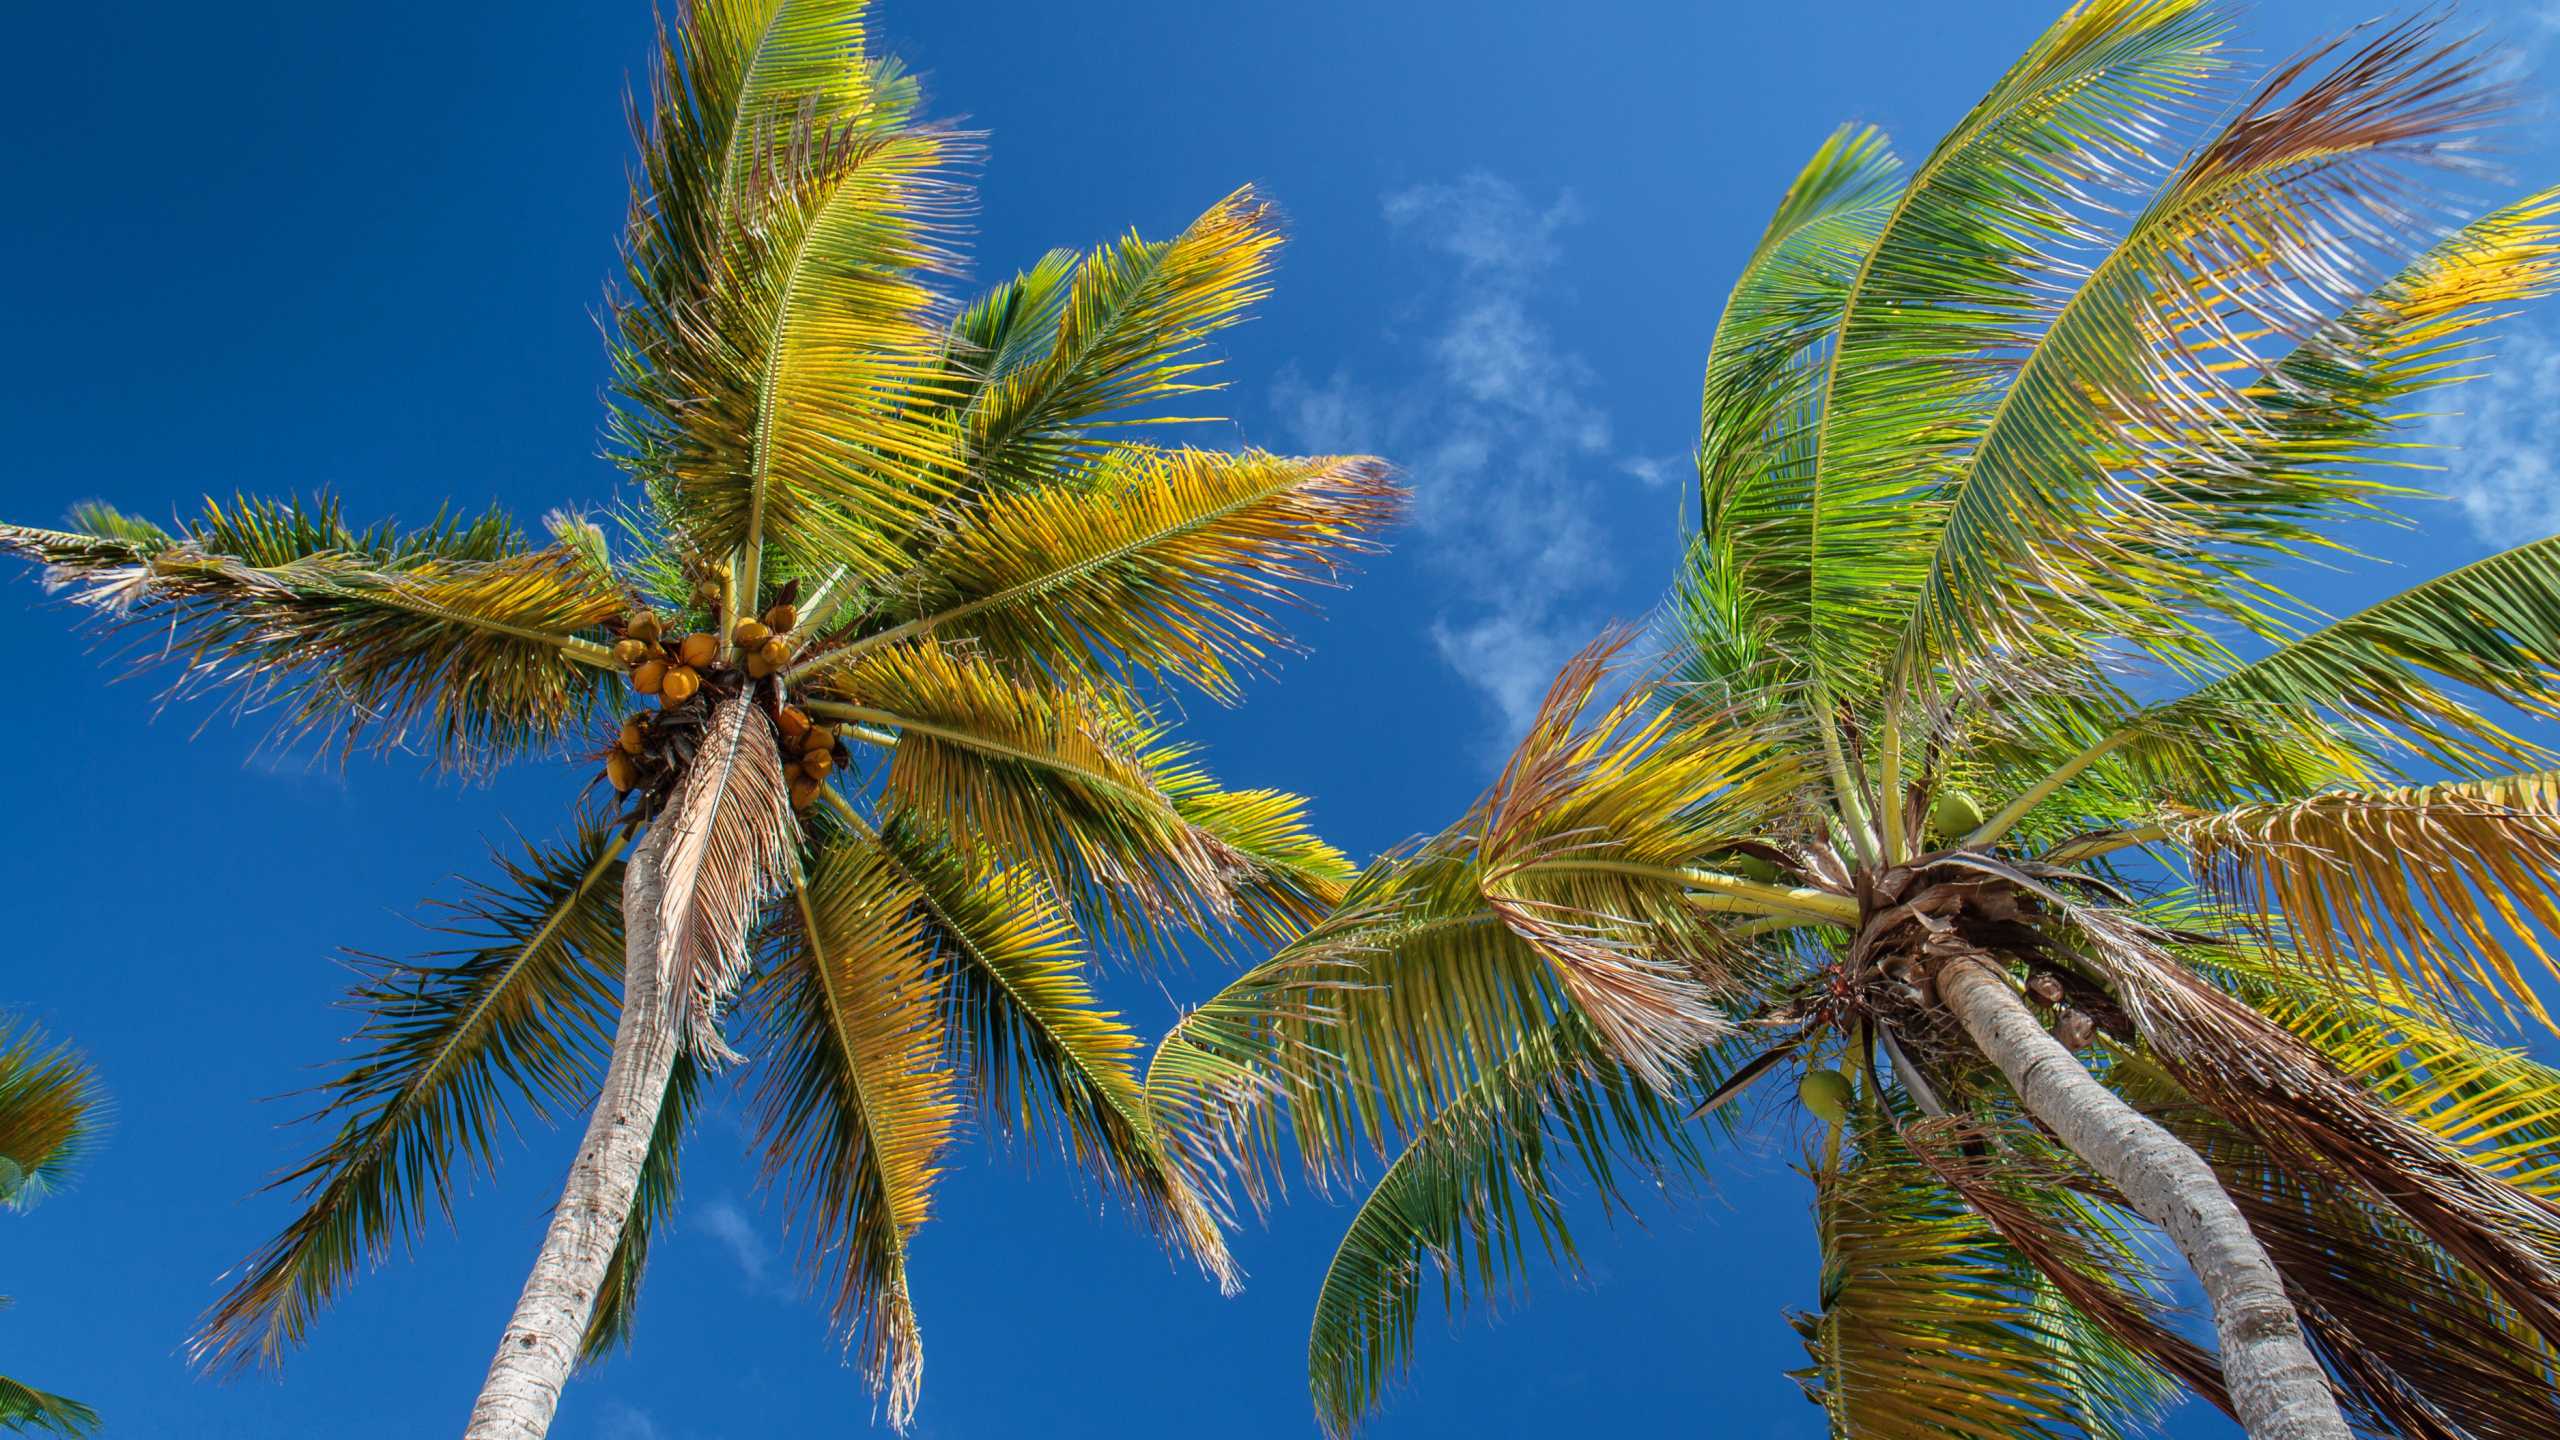 Green Palm Tree Under Blue Sky During Daytime. Wallpaper in 2560x1440 Resolution